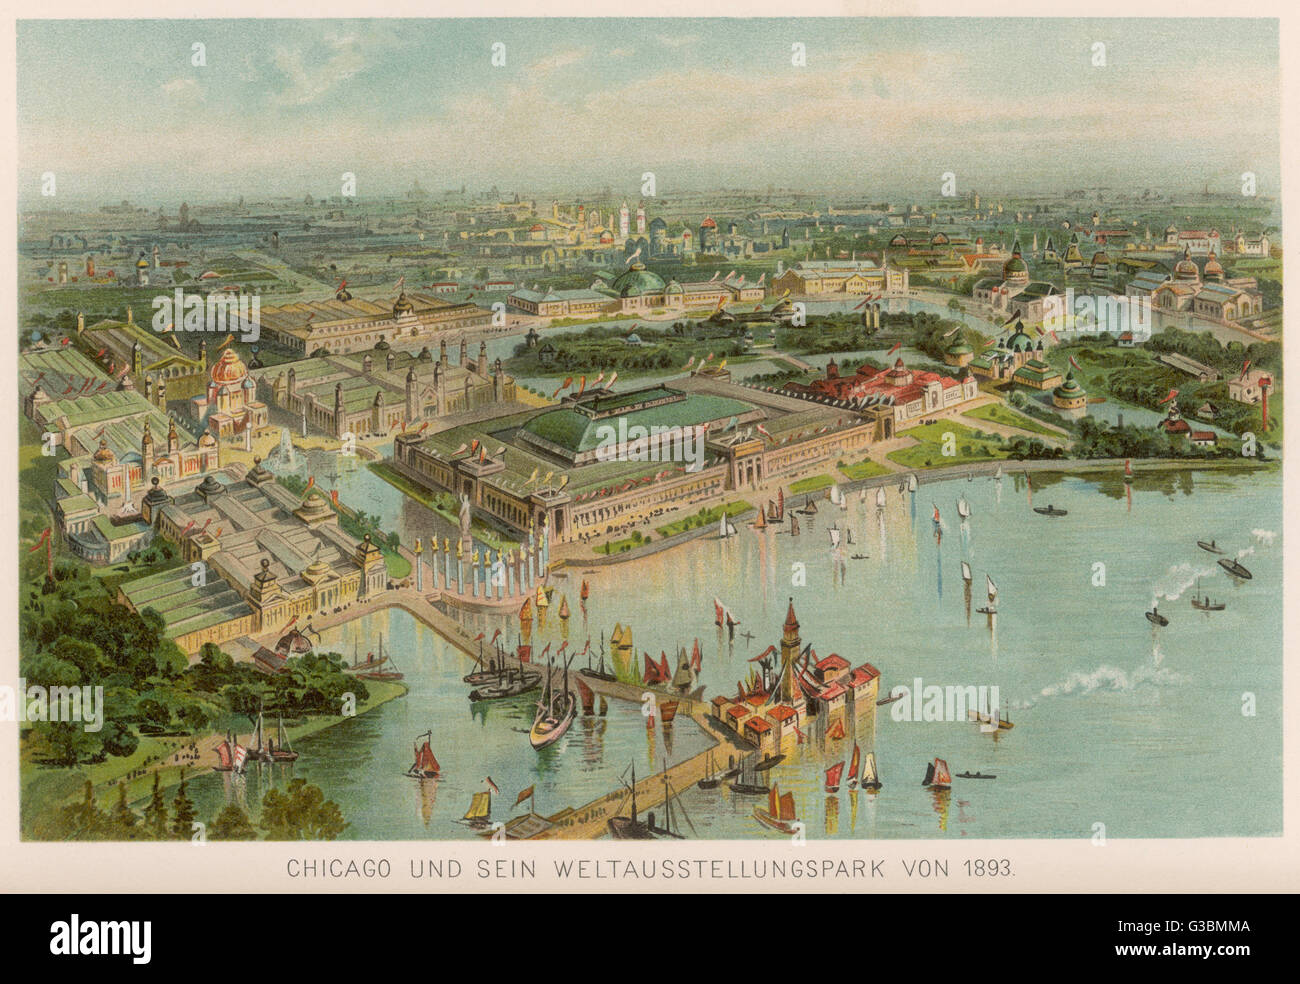 View from the air of the Chicago World Fair.        Date: 1893 Stock Photo